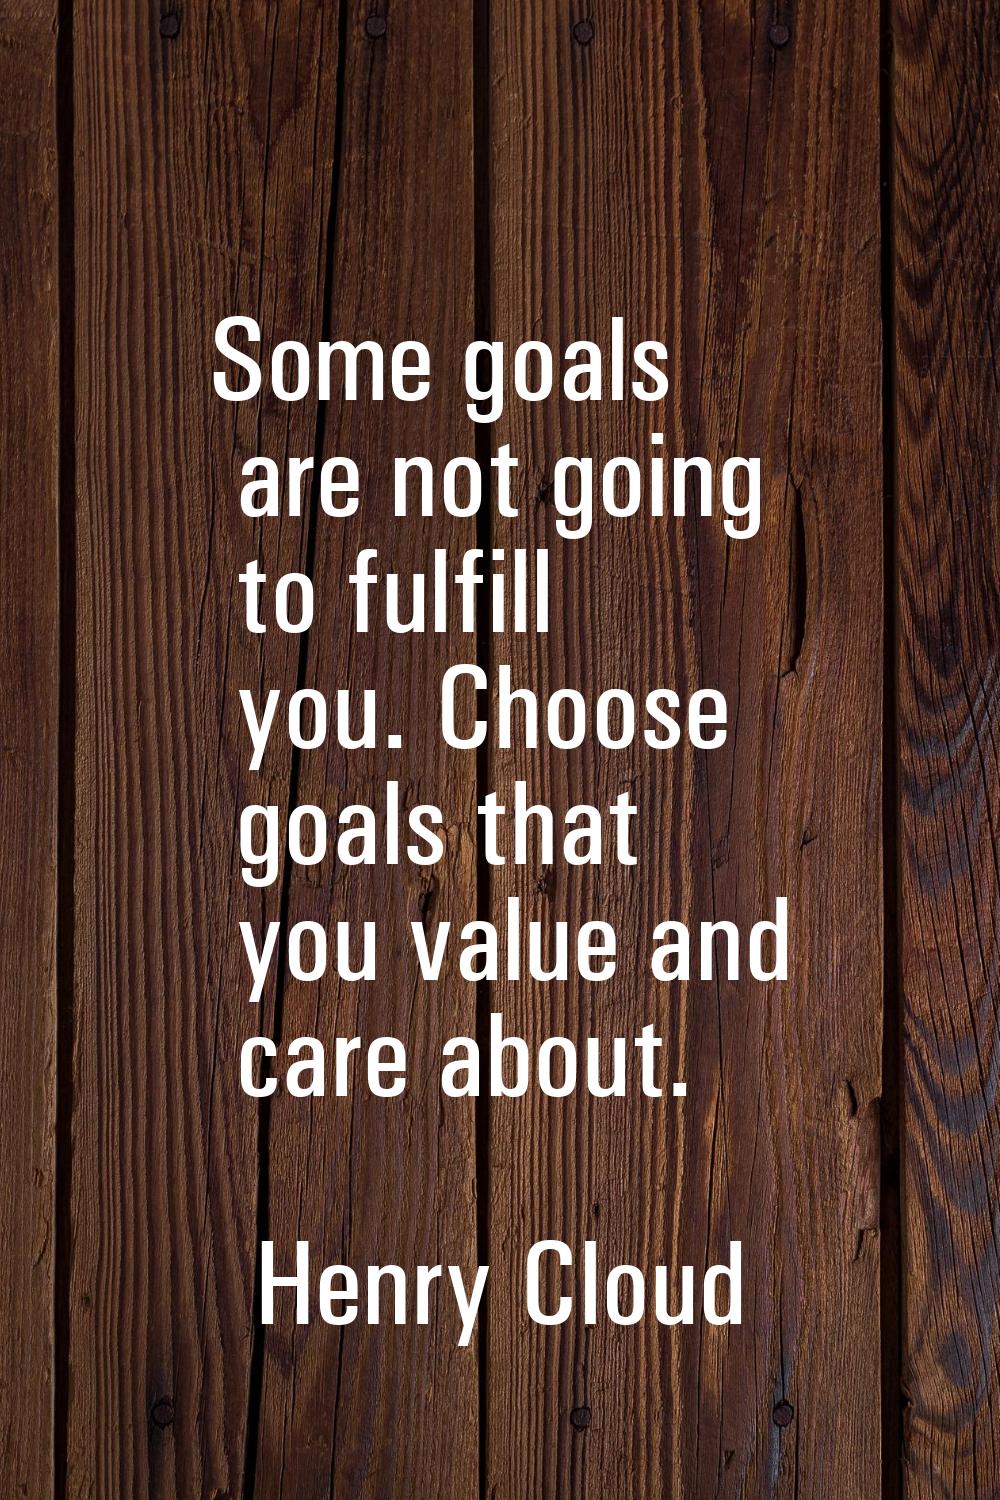 Some goals are not going to fulfill you. Choose goals that you value and care about.